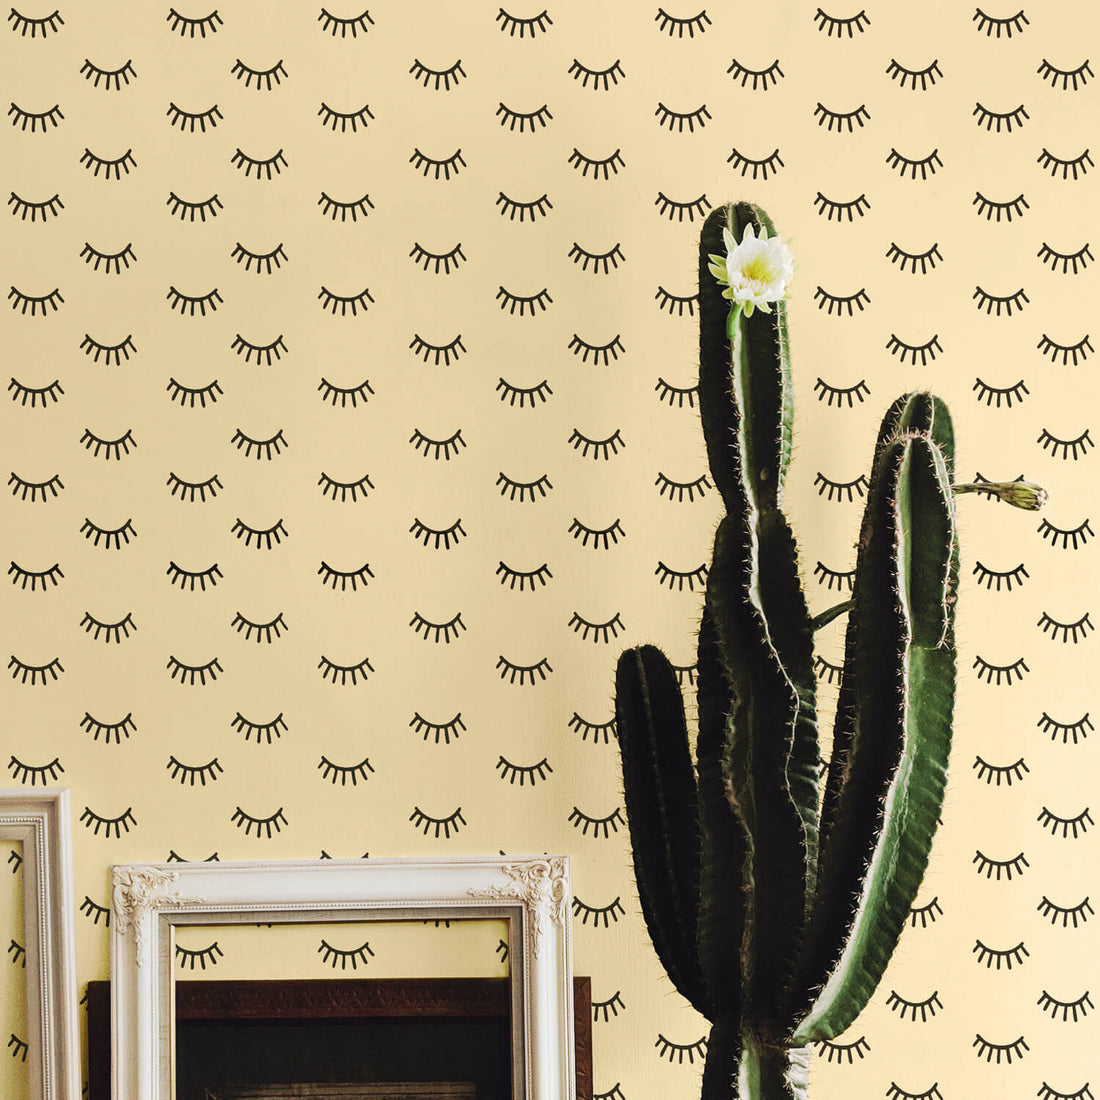 Boho girl's room interior with flowering cactus and sleepy eyes removable wallpaper in yellow and black color